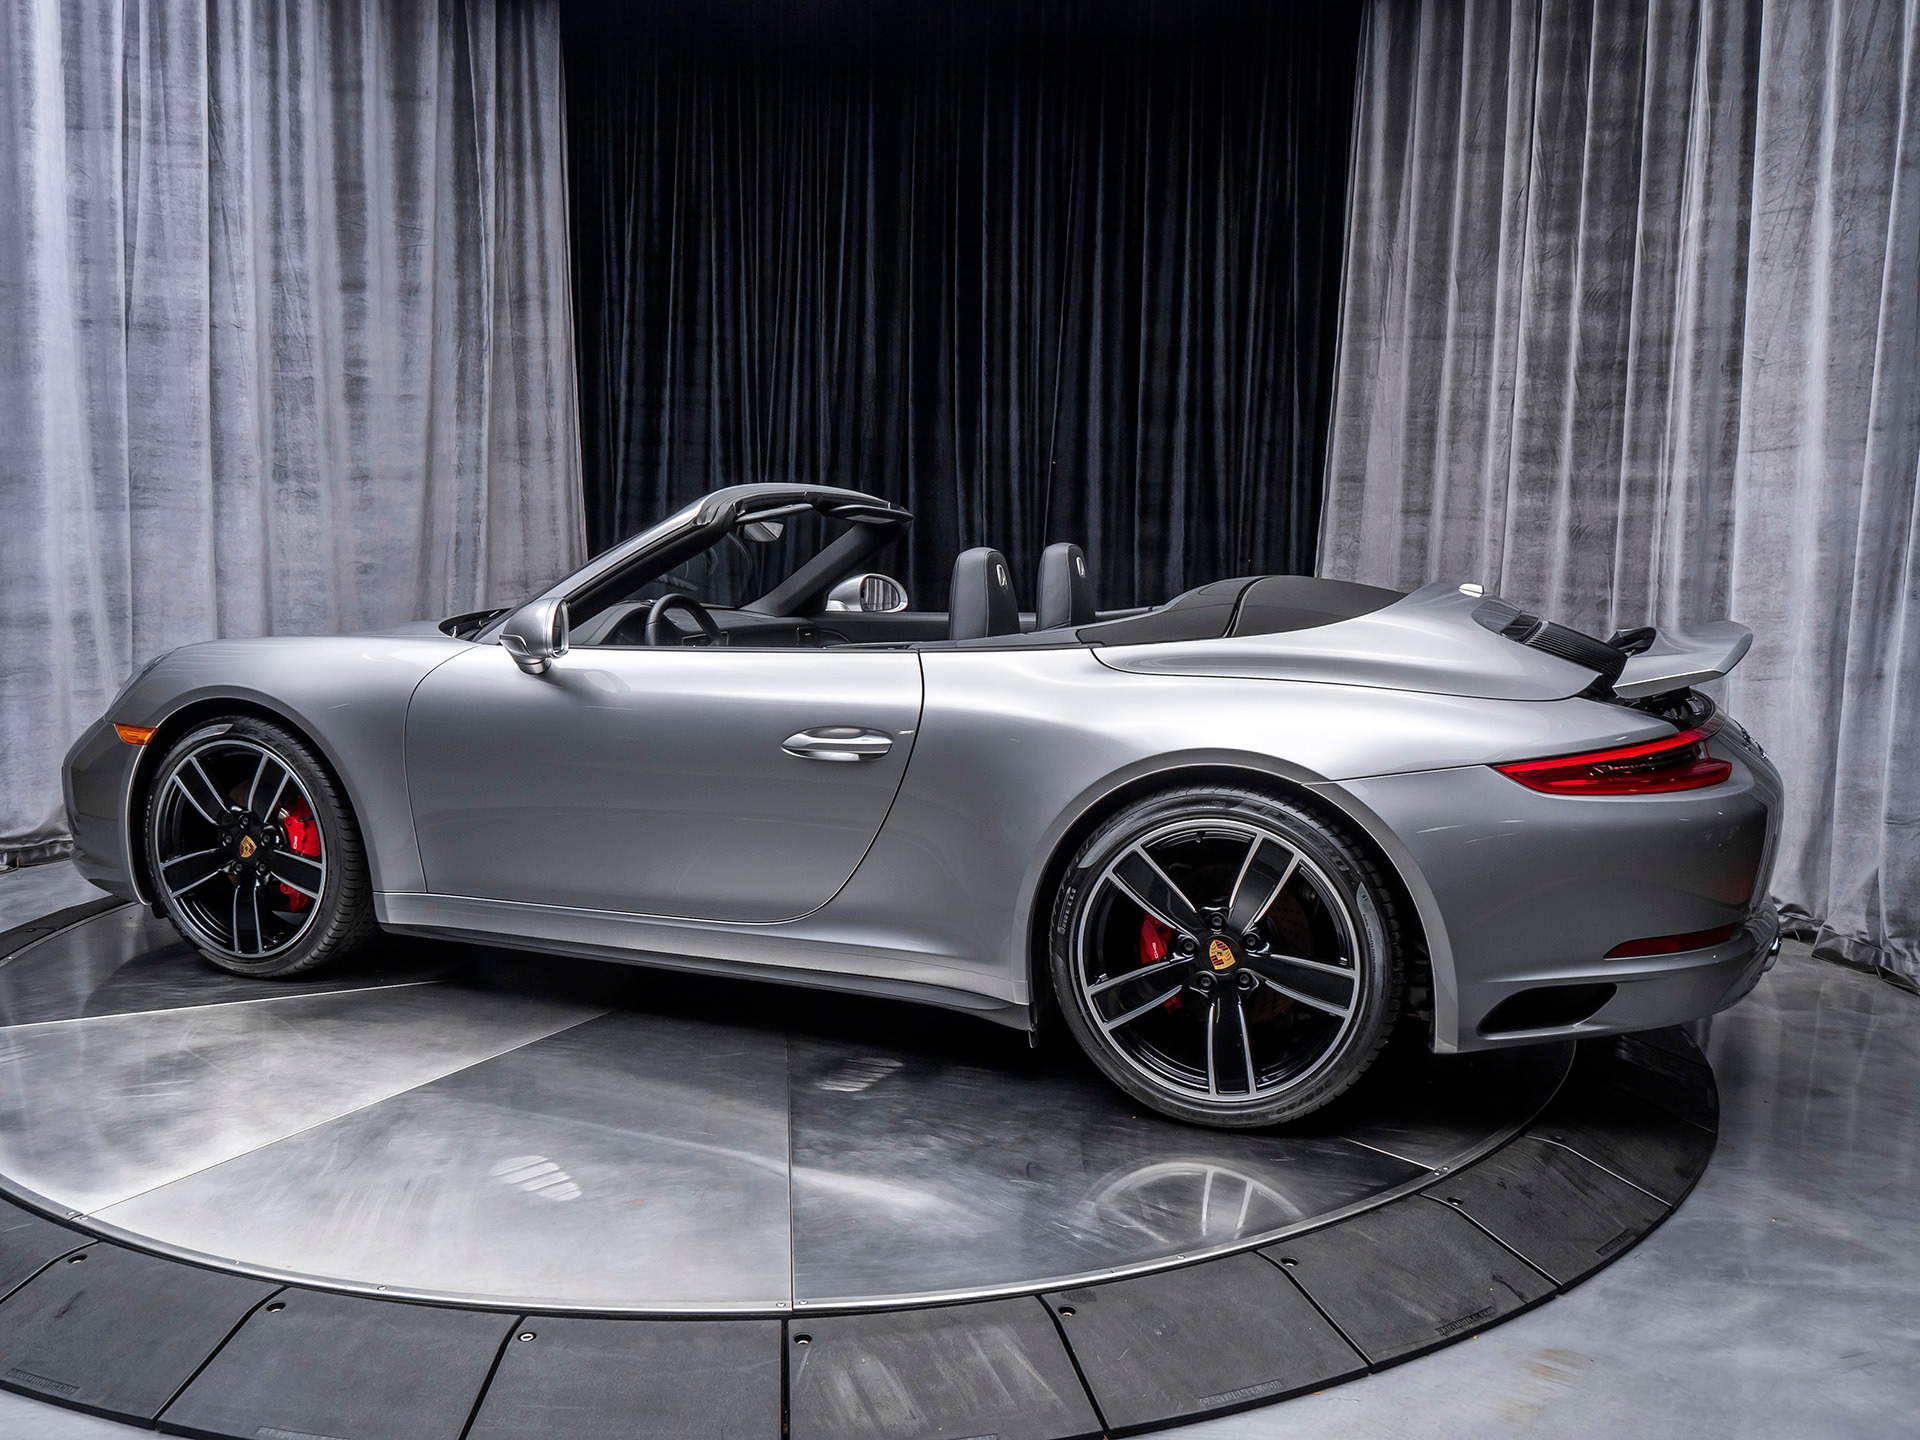 Used 2018 Porsche 911 Carrera 4S Convertible MSRP $152K+ For Sale (Special  Pricing) | Chicago Motor Cars Stock #15989